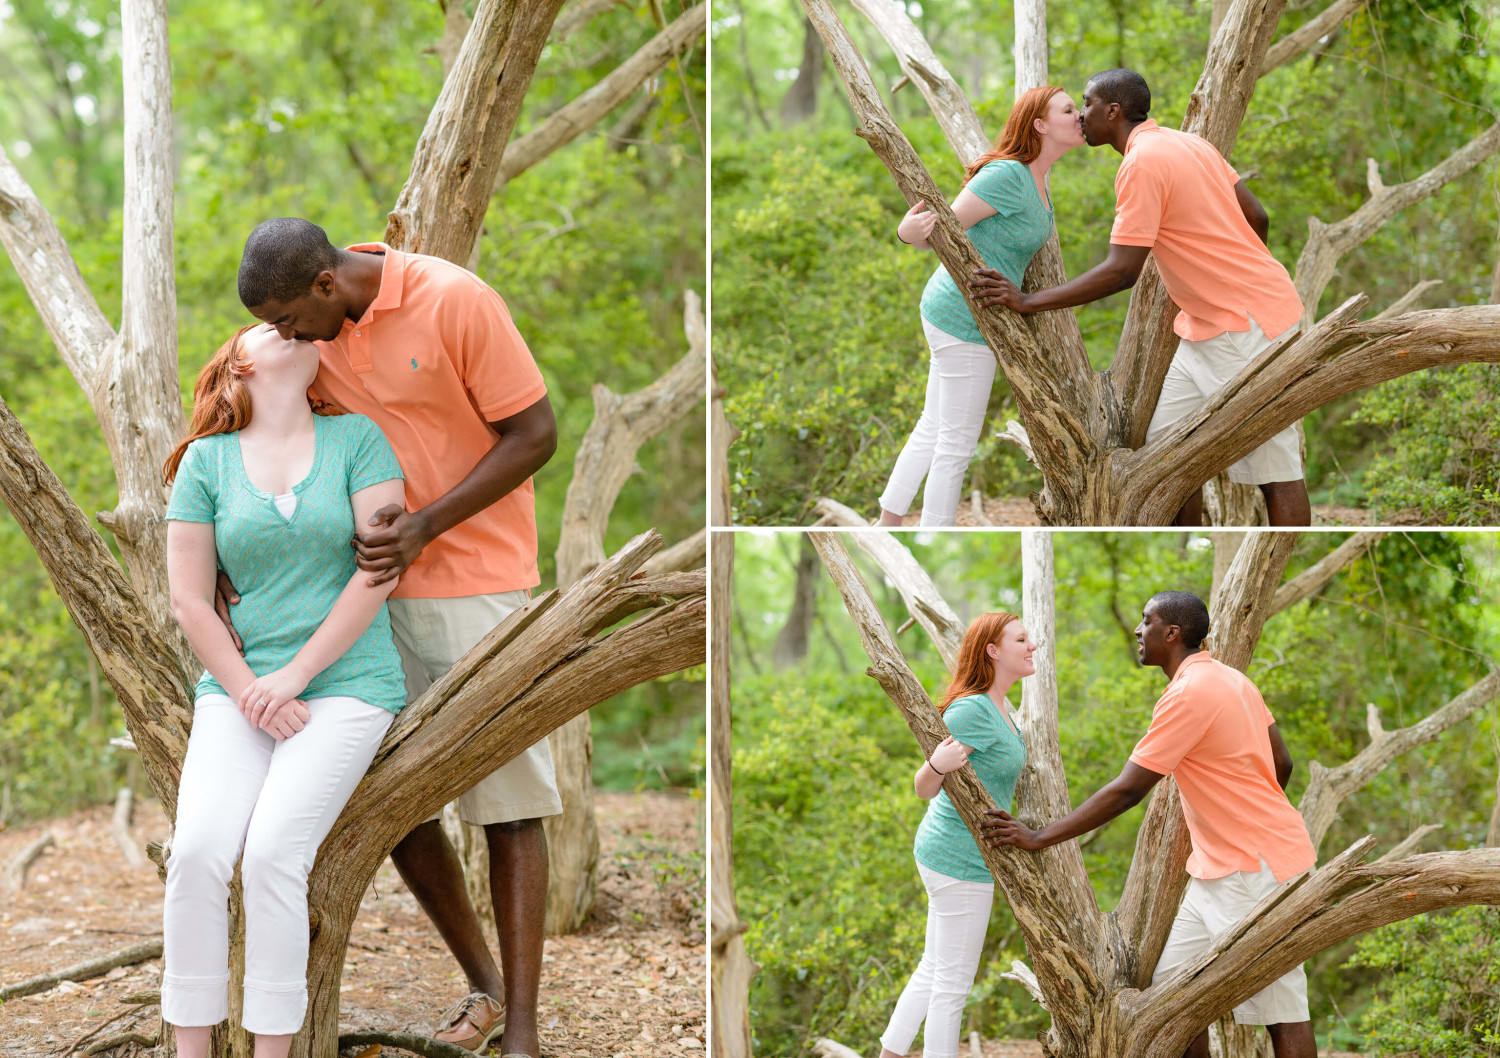 Leaning through the oak trees for a kiss